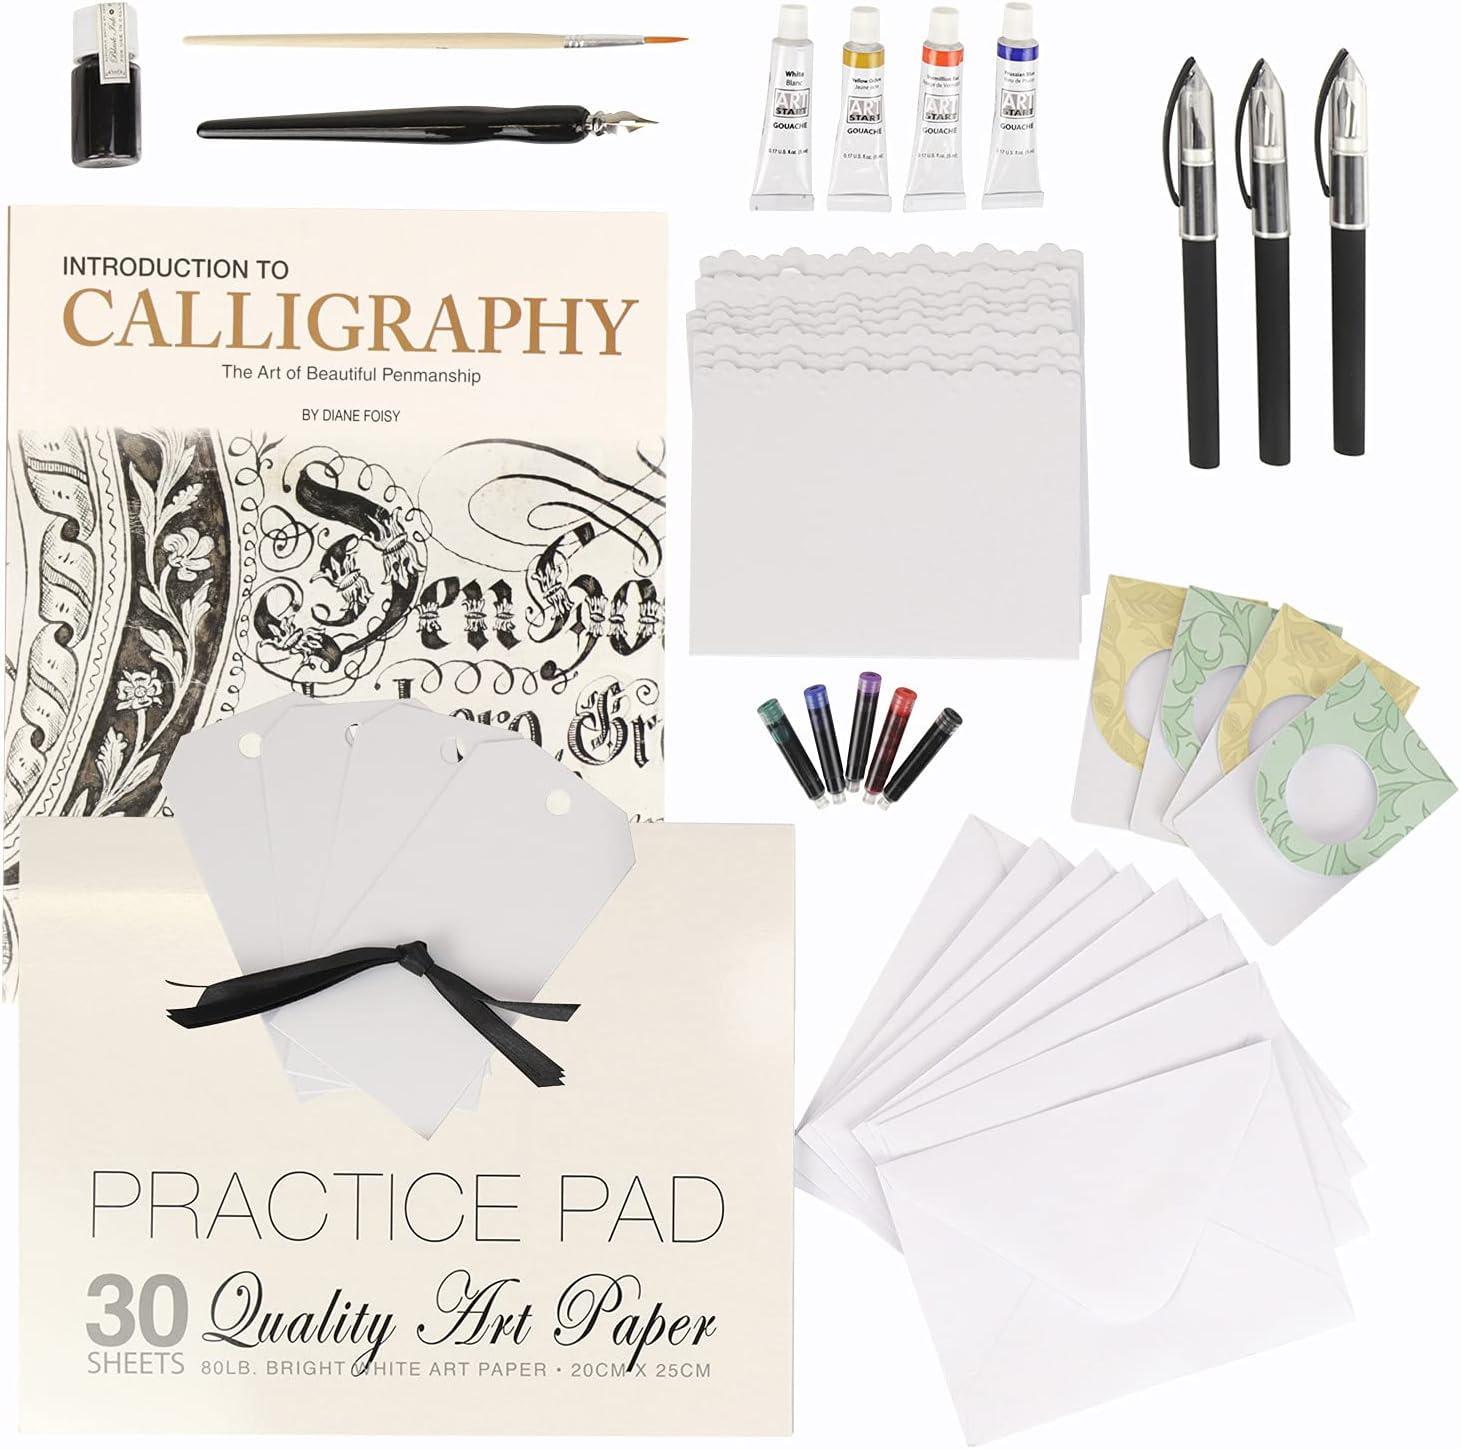 SpiceBox Adult Art Craft & Hobby Kits Introduction to Calligraphy